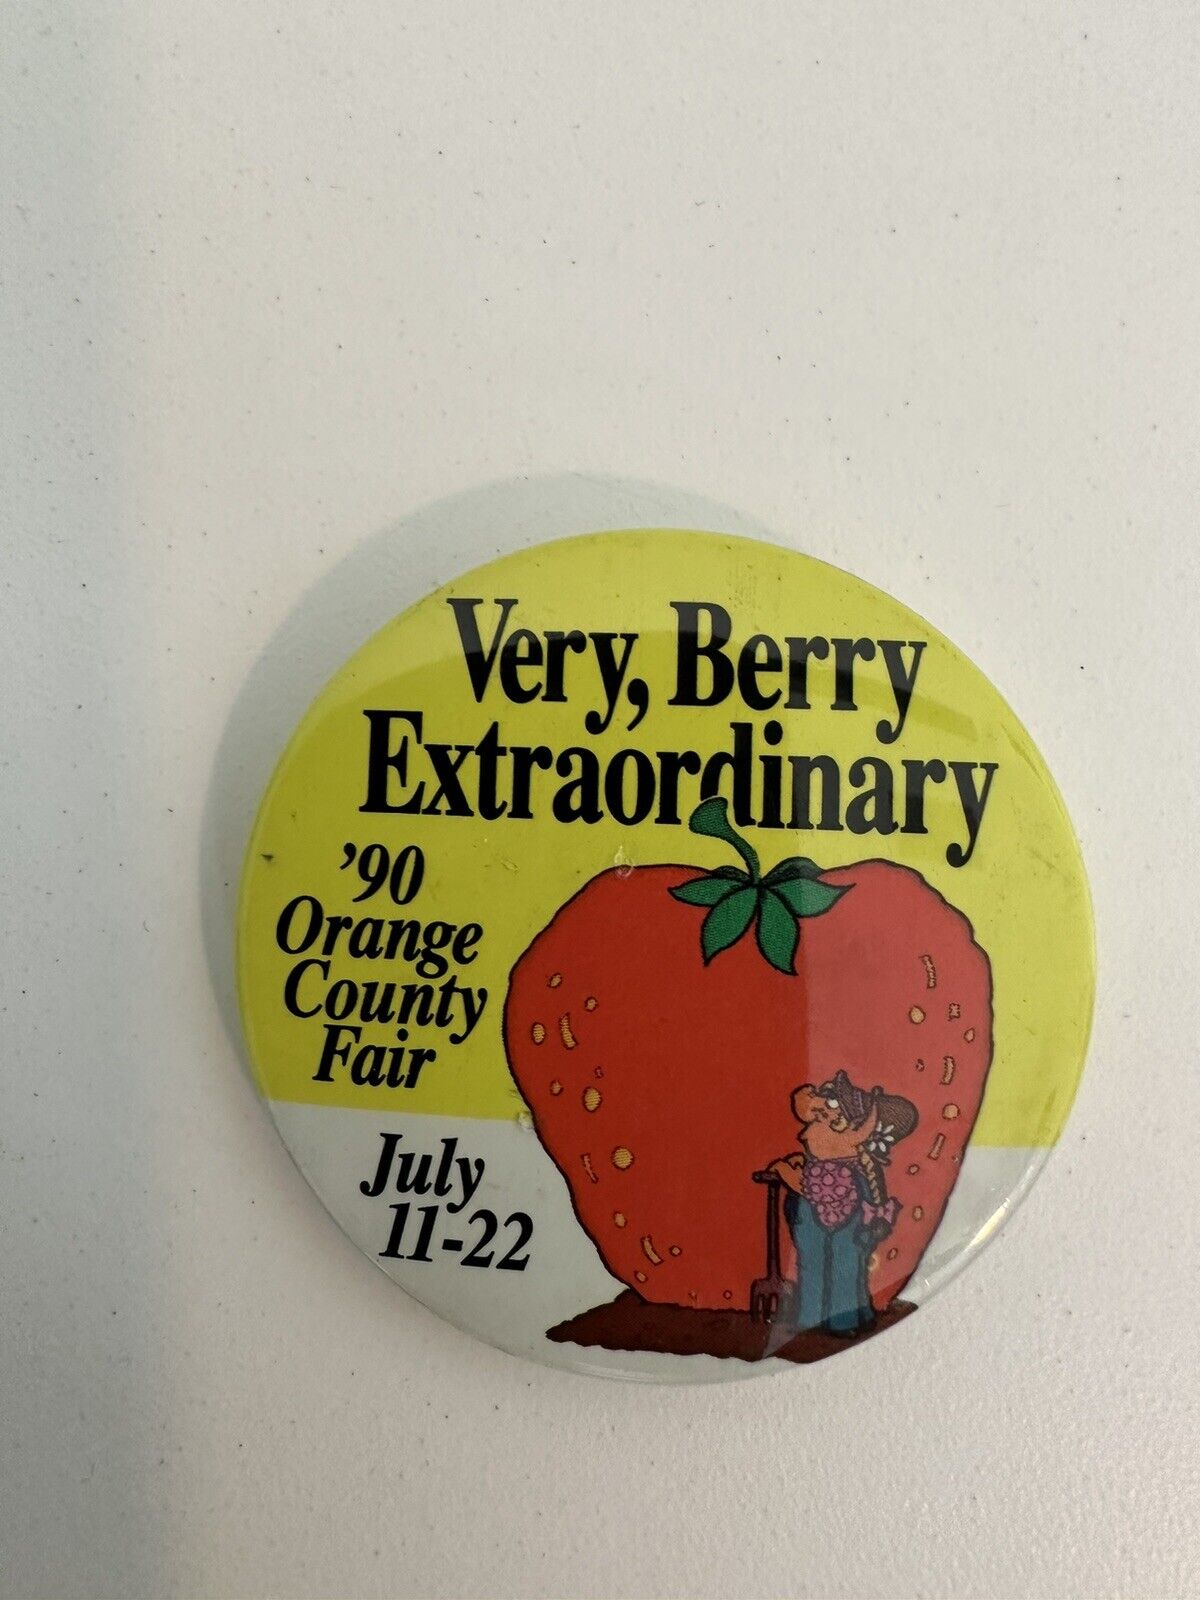 Orange County Fair Button Pin 1990 July 11-22 VERY, Berry Extraordinary